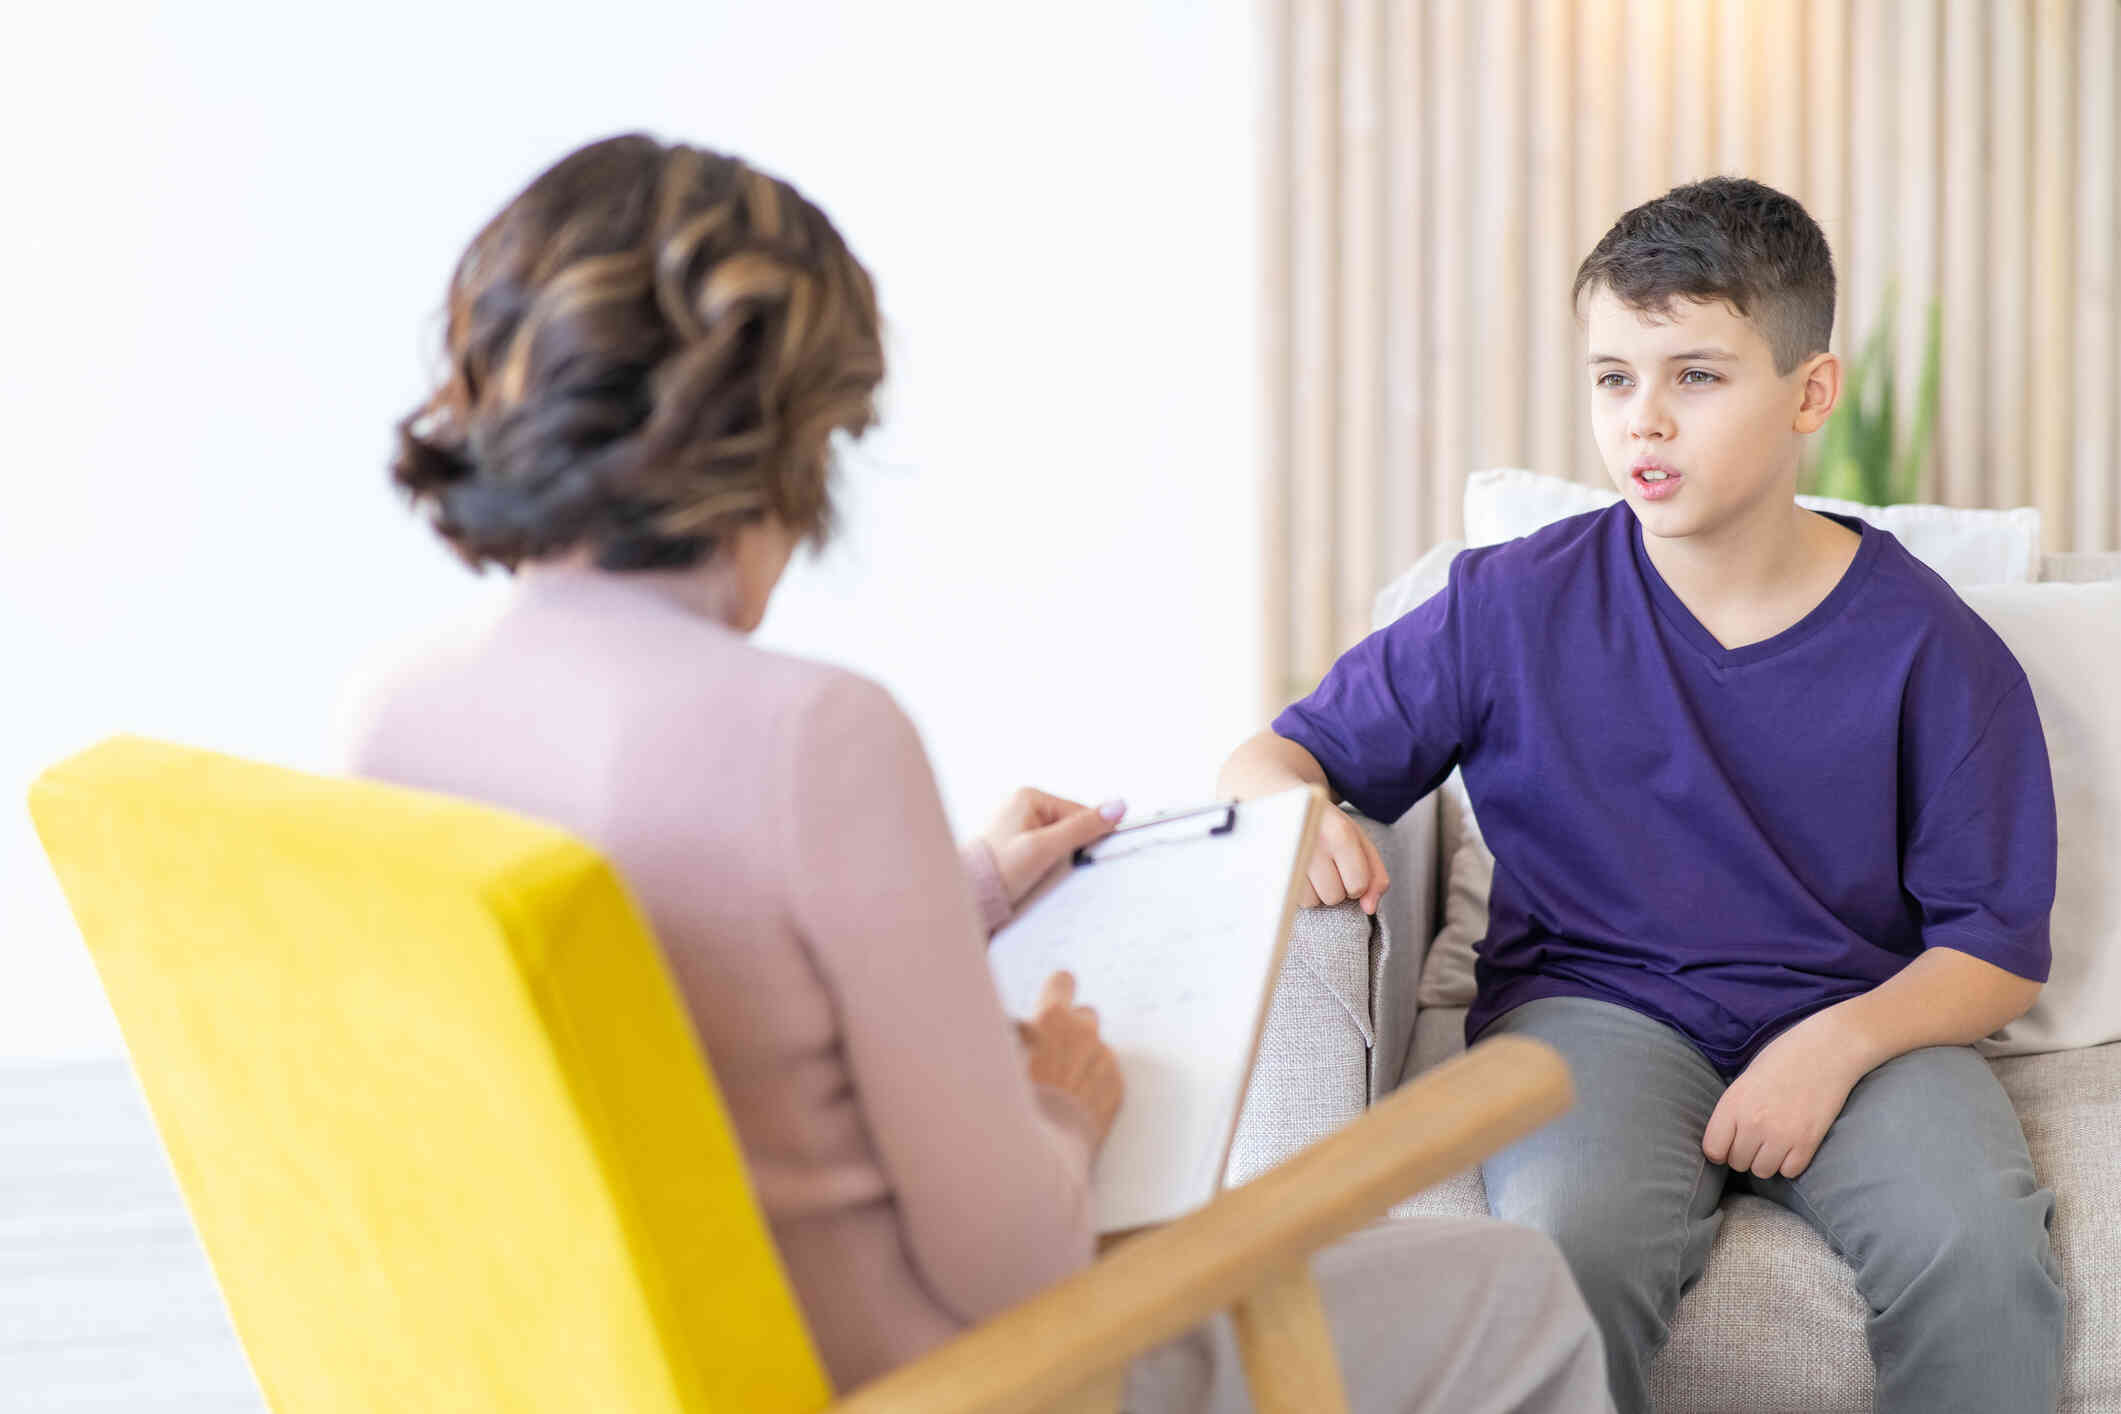 A young boy in a purple shirt sits in a chair and talks to the female therapinst sitting across from him.